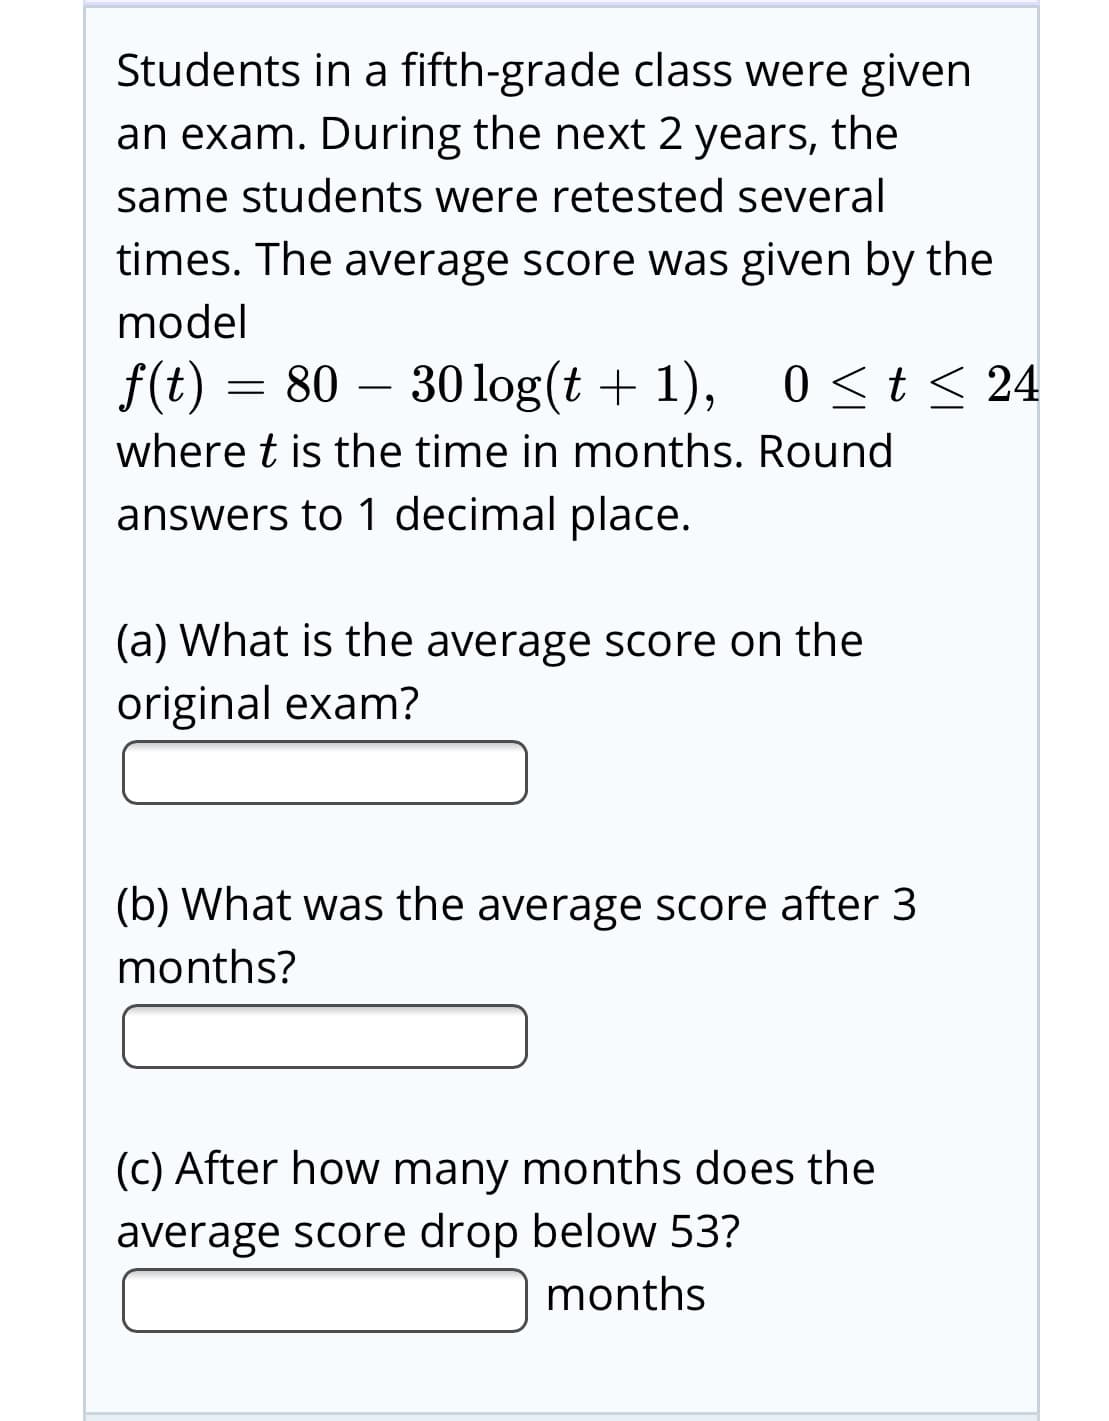 Students in a fifth-grade class were given
an exam. During the next 2 years, the
same students were retested several
times. The average score was given by the
model
f(t) = 80 – 0 <t< 24
30 log(t + 1),
where t is the time in months. Round
answers to 1 decimal place.
(a) What is the average score on the
original exam?
(b) What was the average score after 3
months?
(C) After how many months does the
average score drop below 53?
months
